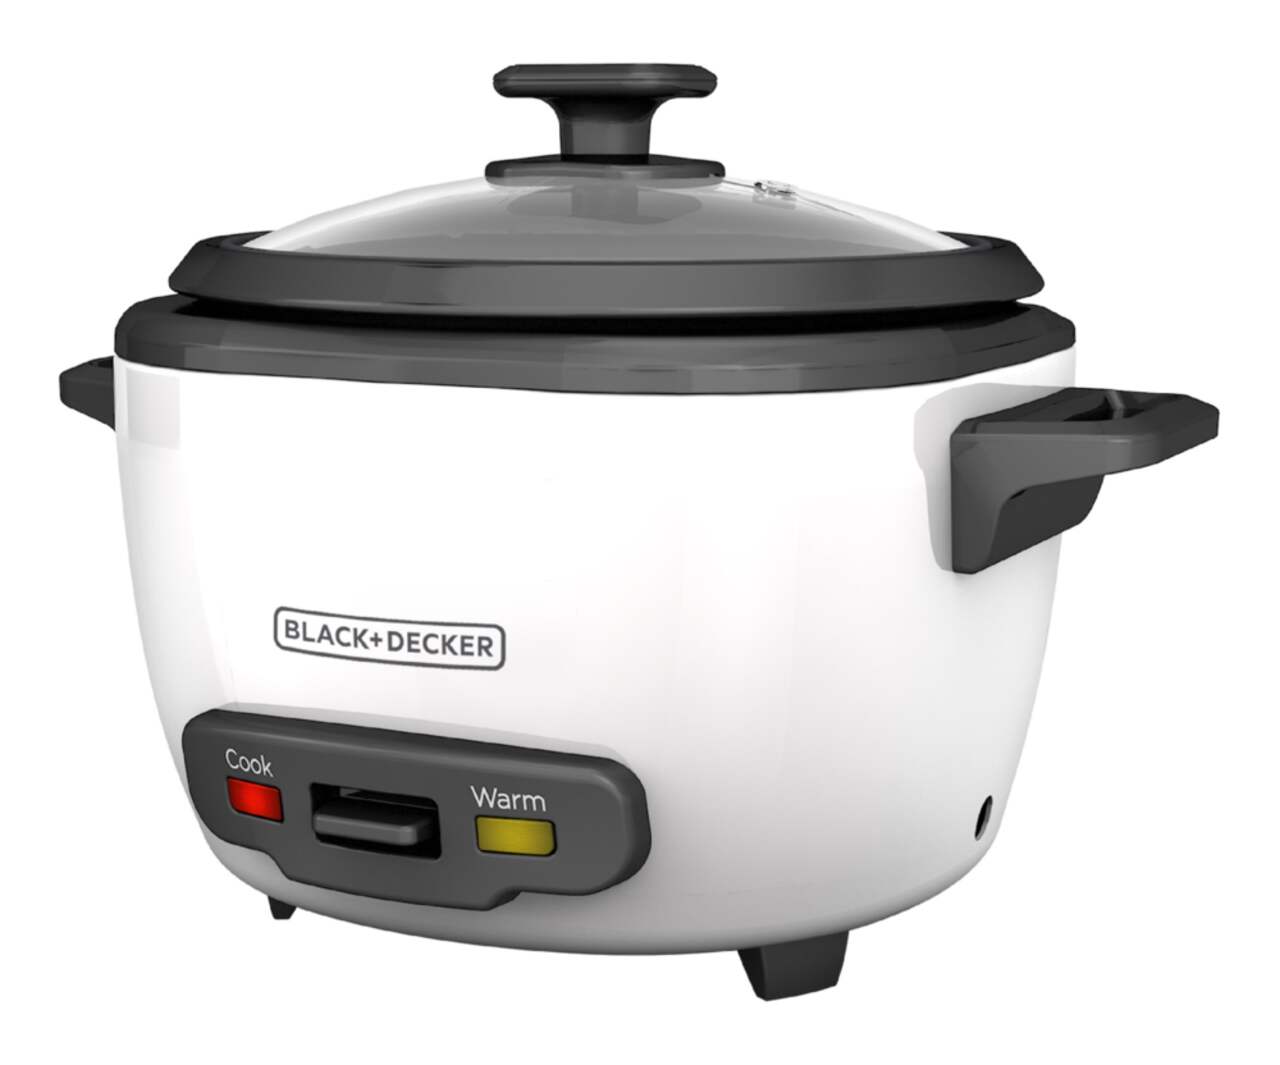 https://media-www.canadiantire.ca/product/living/kitchen/kitchen-appliances/0431373/black-decker-16-cup-rice-cooker-fa7b1d3e-f8ce-4b6f-a94e-4f5282c97826.png?imdensity=1&imwidth=1244&impolicy=mZoom